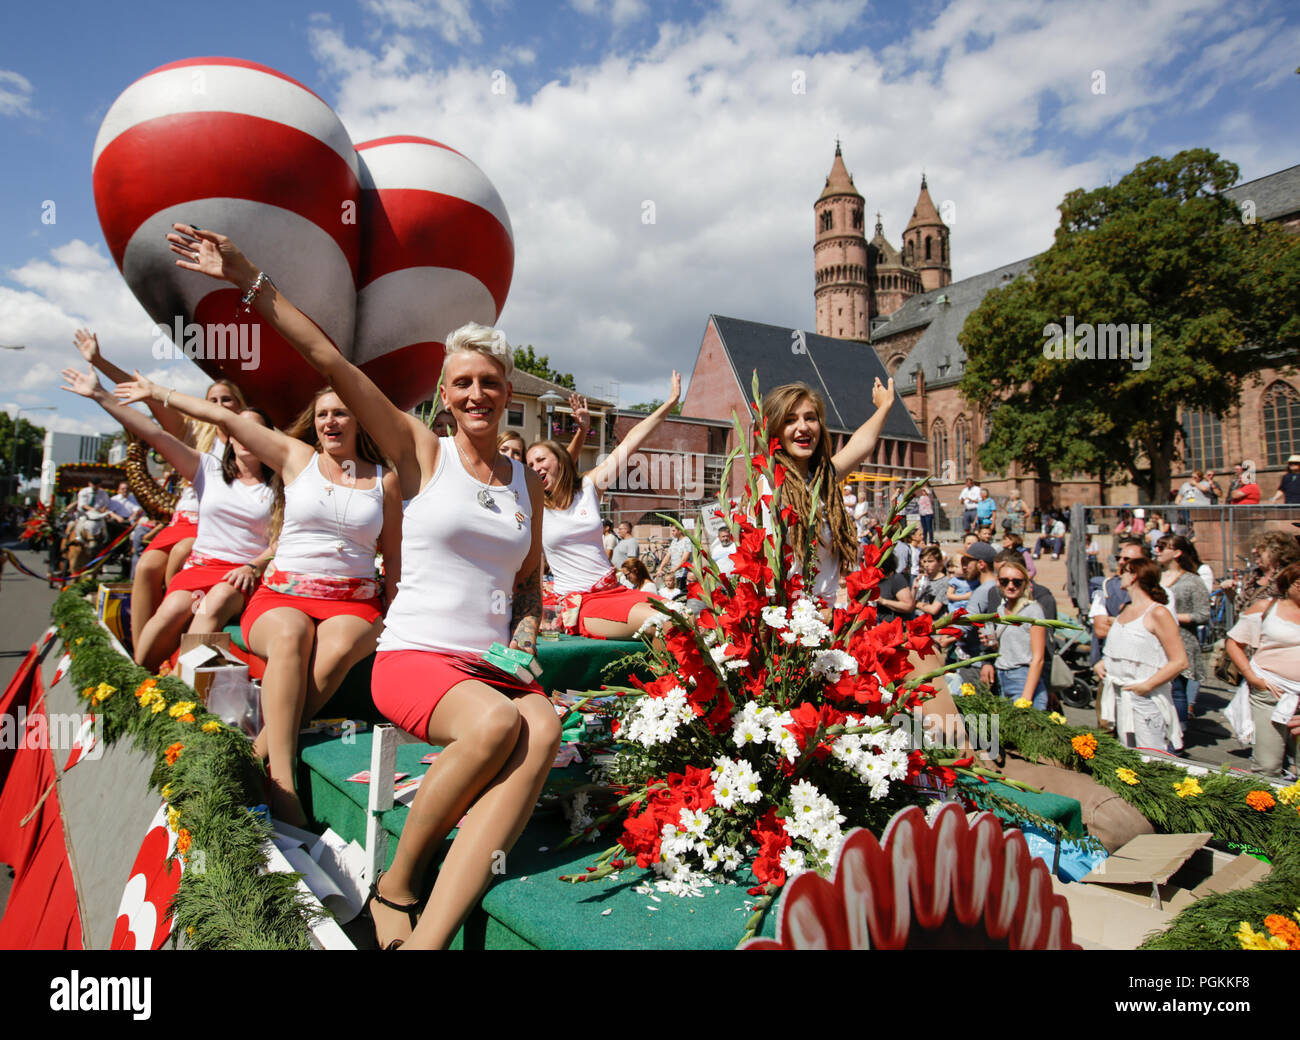 Worms, Germany. 26th Aug, 2018. Girls of the Wormser Carneval Club WCC 1974 are pictured on a float in front of a giant red-white striped heart (emblem of the Backfischfest). The first highlight of the 2018 Backfischfest was the big parade through the city of Worms with over 70 groups and floats. Community groups, music groups and businesses from Worms and further afield took part. Credit: Michael Debets/Pacific Press/Alamy Live News Stock Photo